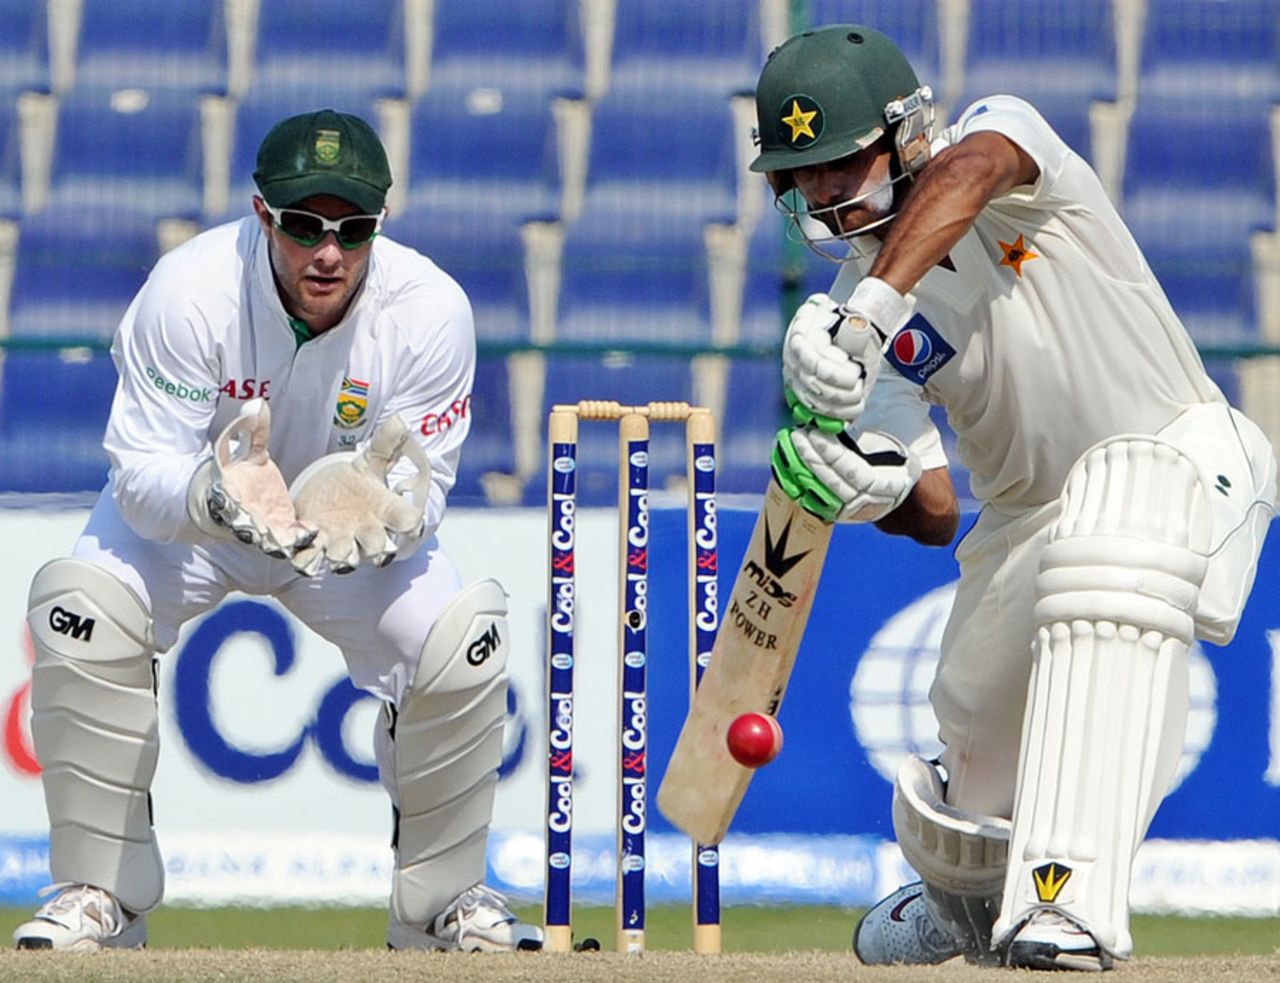 Mohammad Hafeez watches the ball on to his bat, Pakistan v South Africa, 2nd Test, Abu Dhabi, 5th day, November 24, 2010